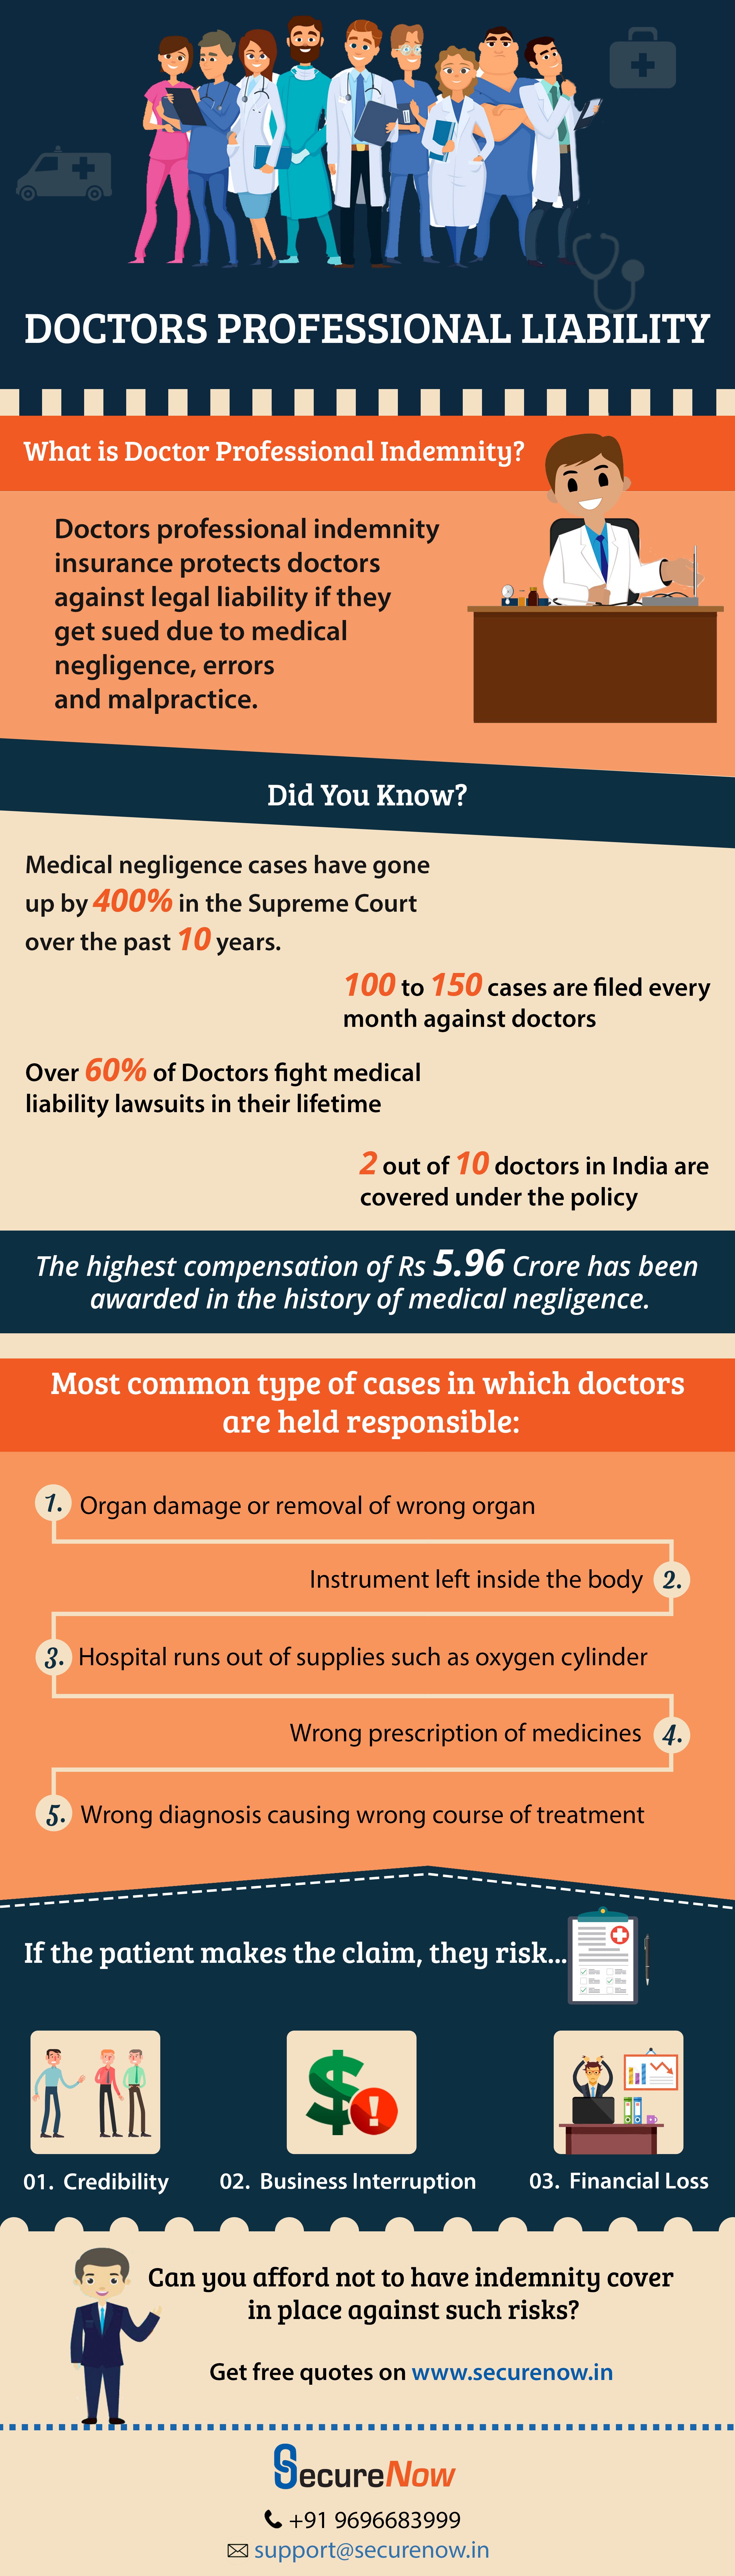 Why Should Doctors Buy Professional Indemnity Insurance?